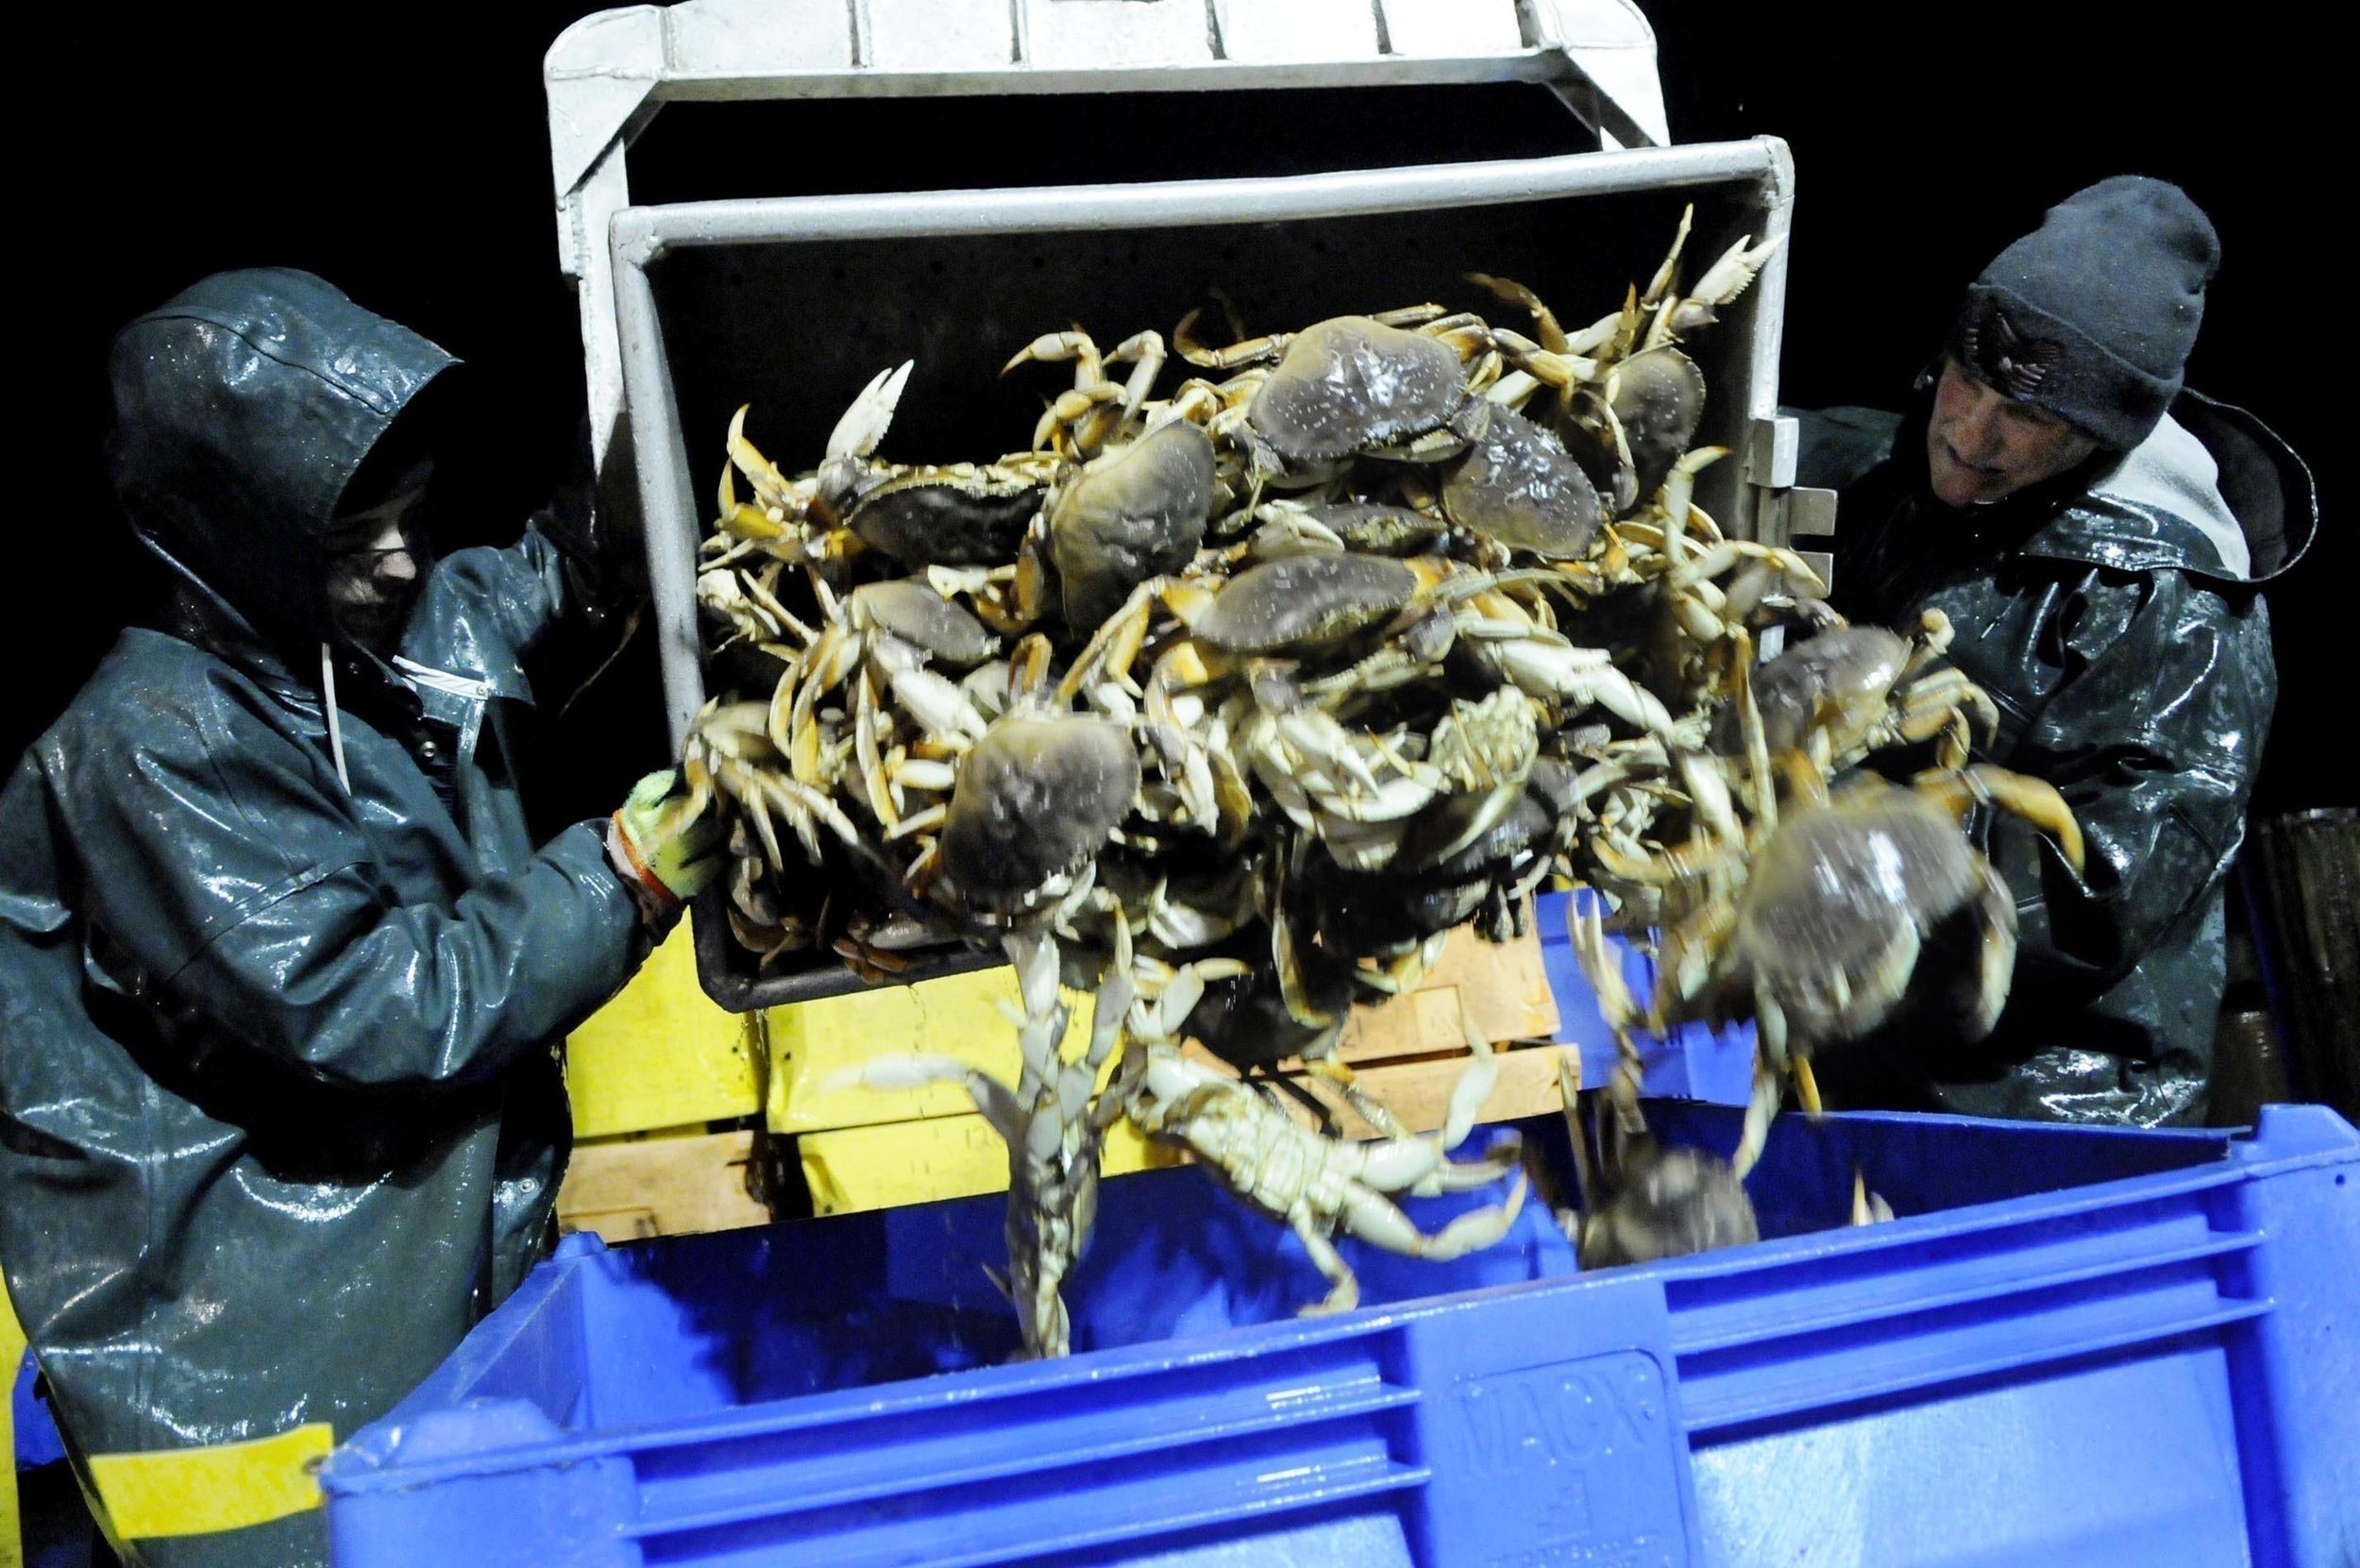 After delay, Dungeness crab season opens on Oregon coast The